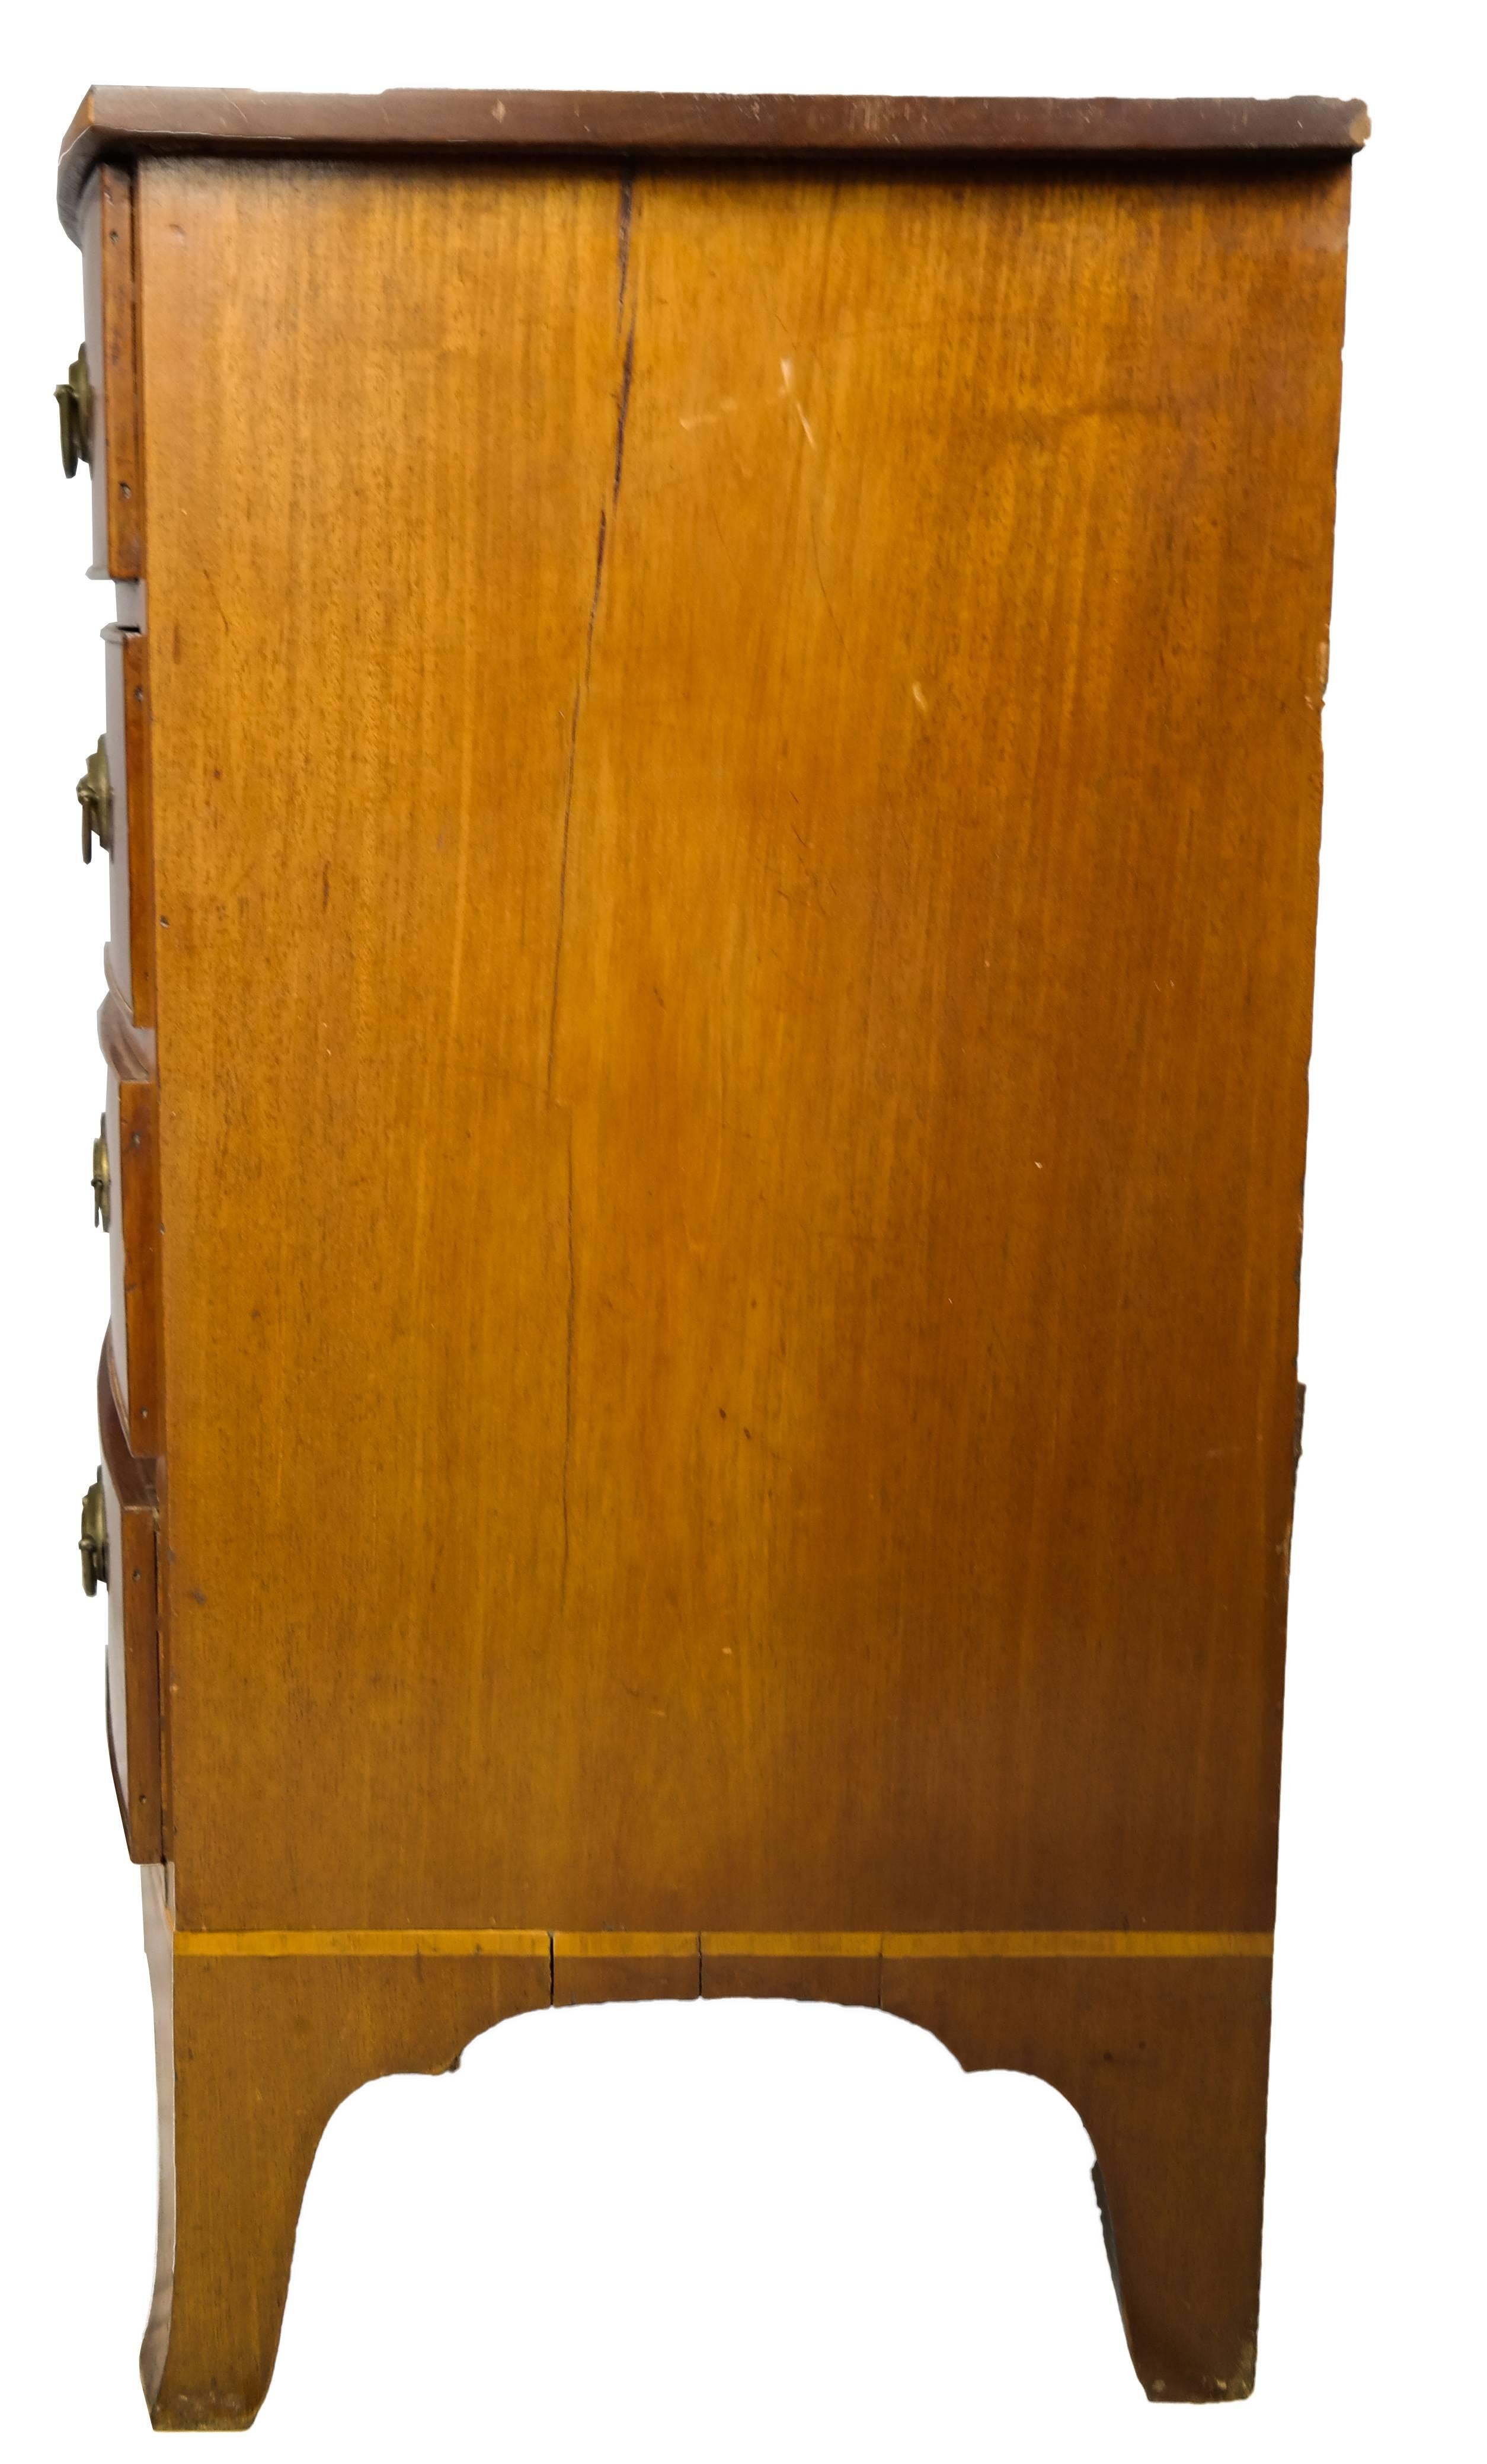 Late 18th Century American Mahogany Bowfront Chest of Drawers, circa 1790. 7